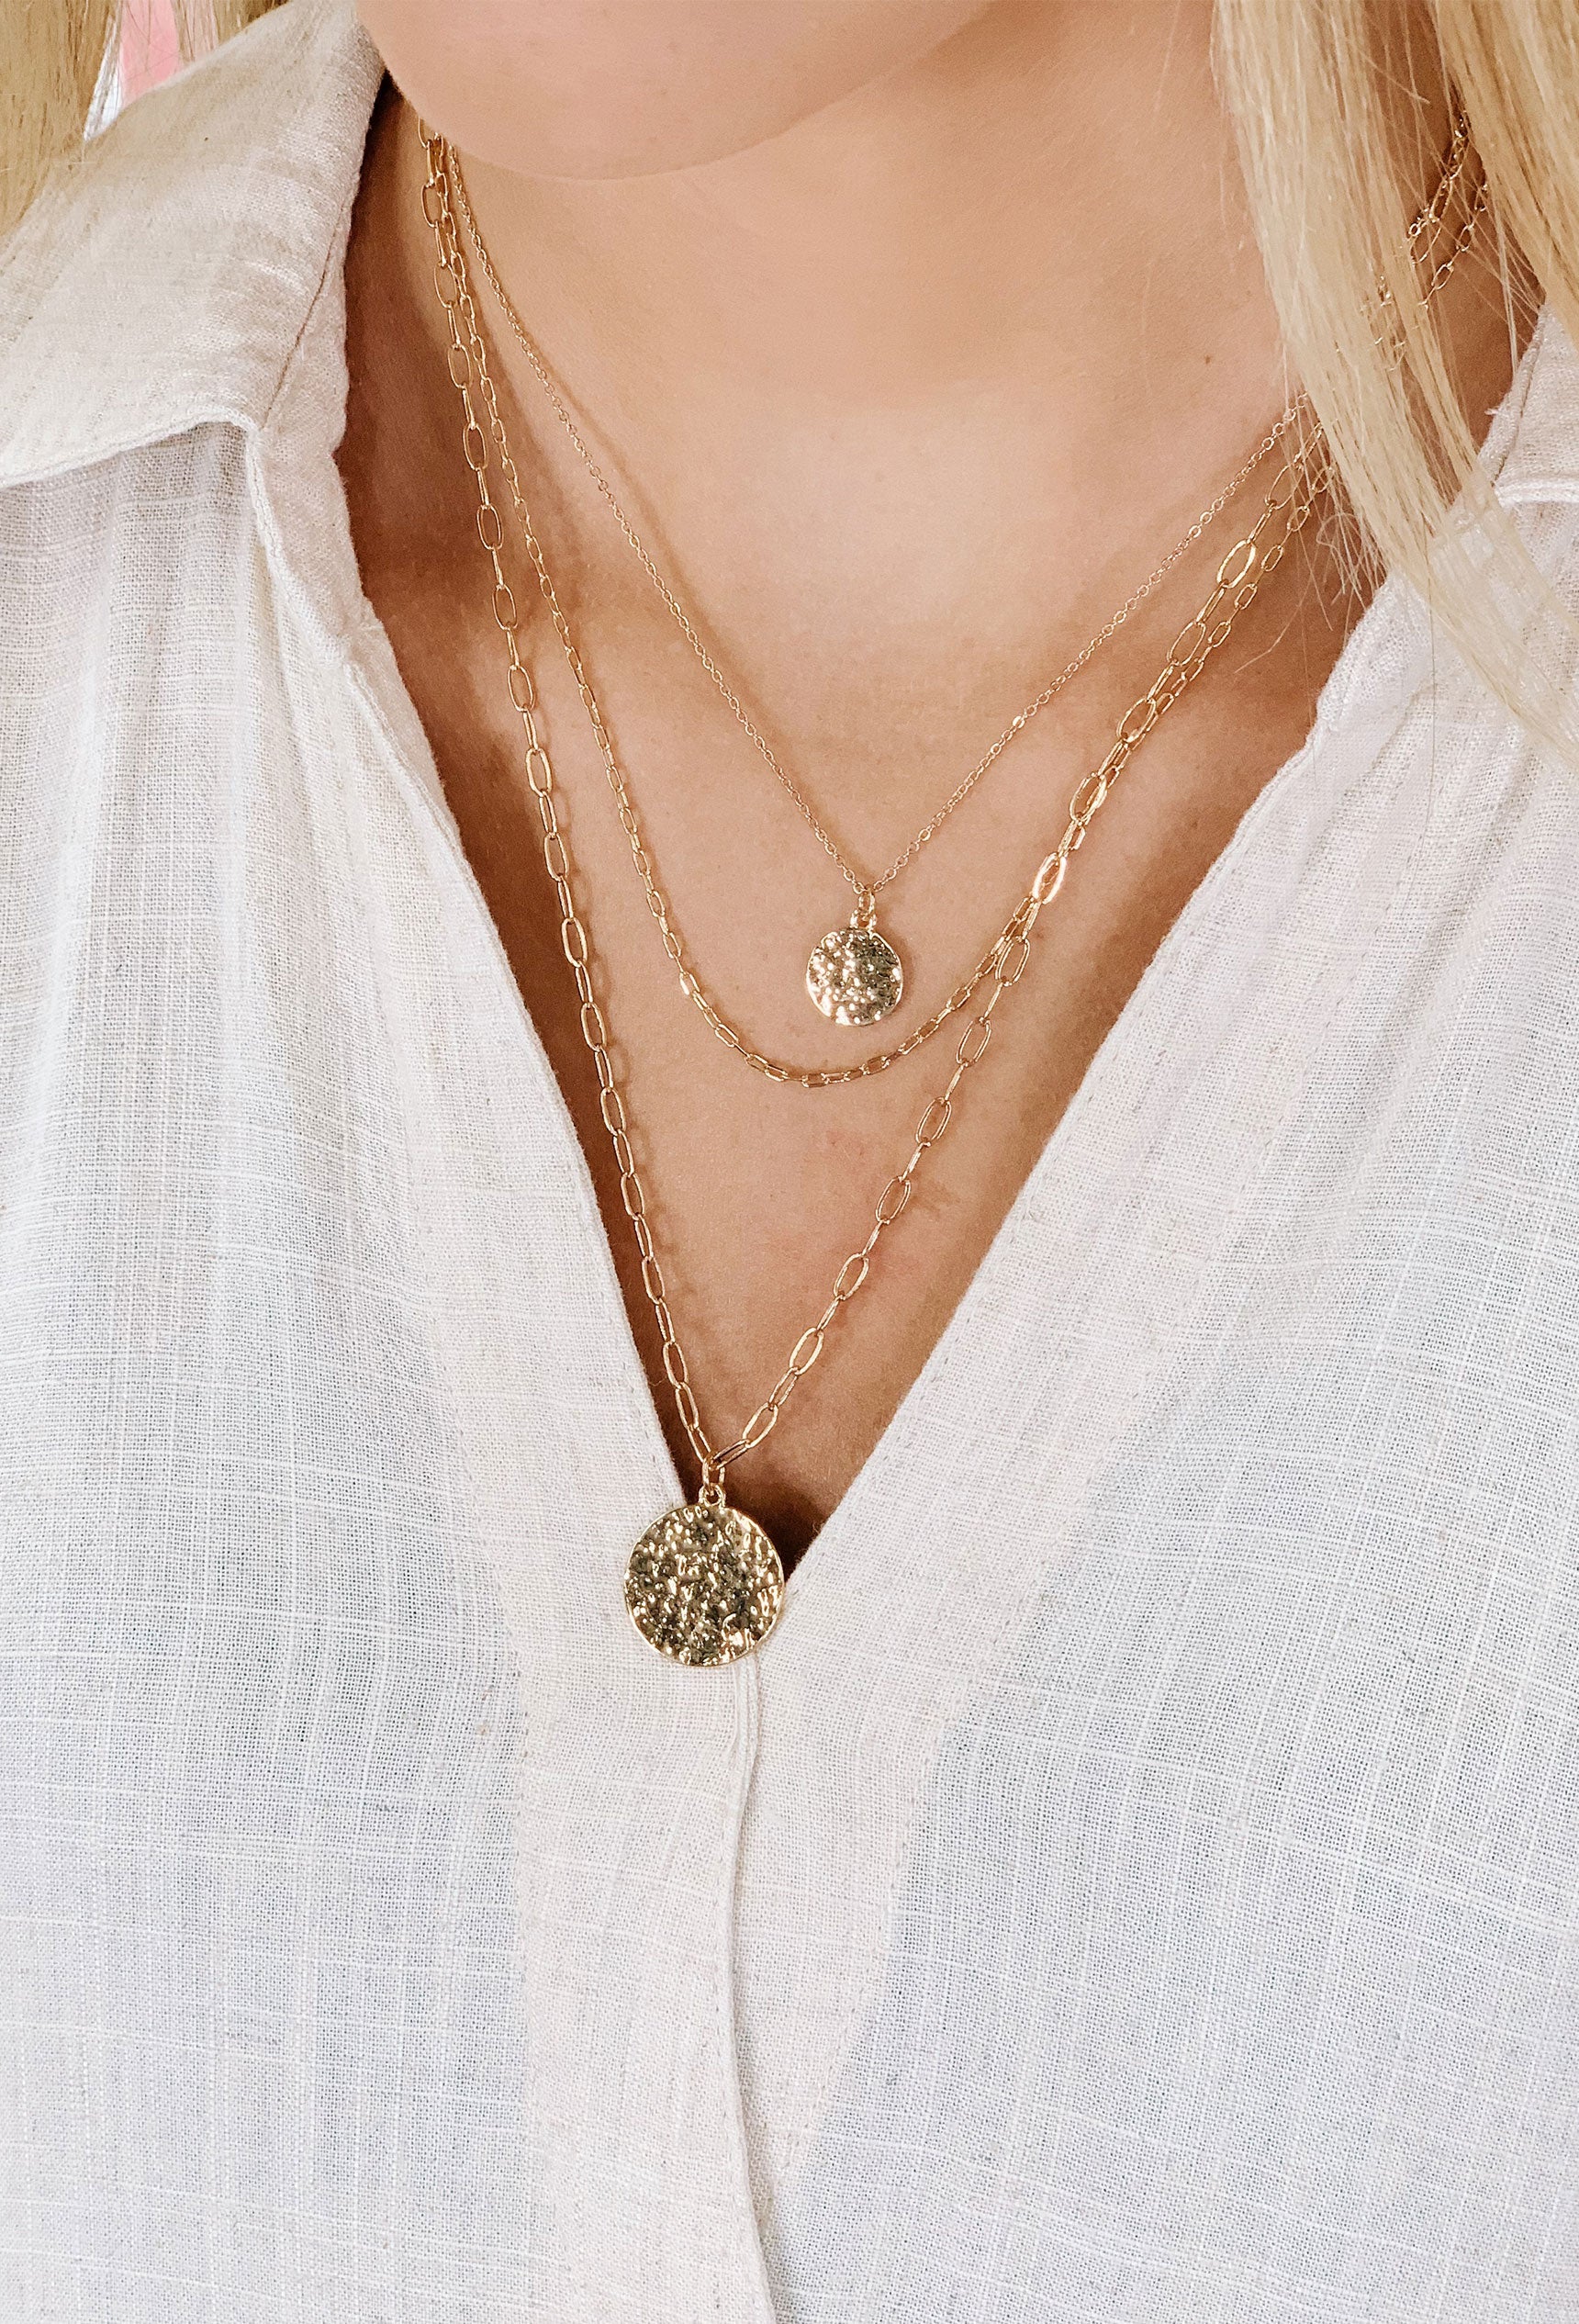 Layered Gold Coin Necklace, Lightweight, dainty chains with two textured charms, lobster clasp